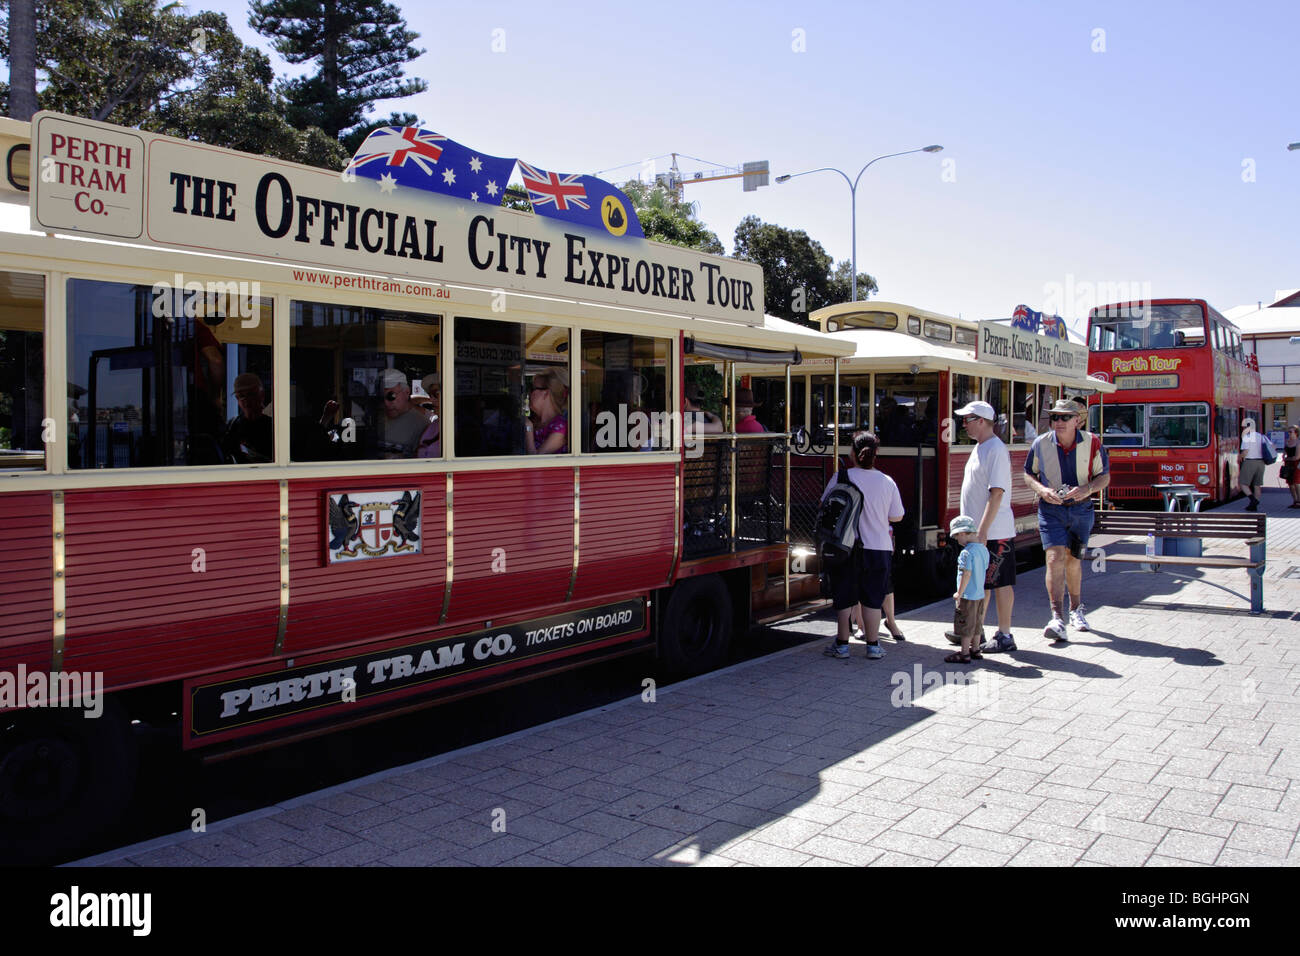 The official City Explorer Tour in Perth, Western Australia. Stock Photo